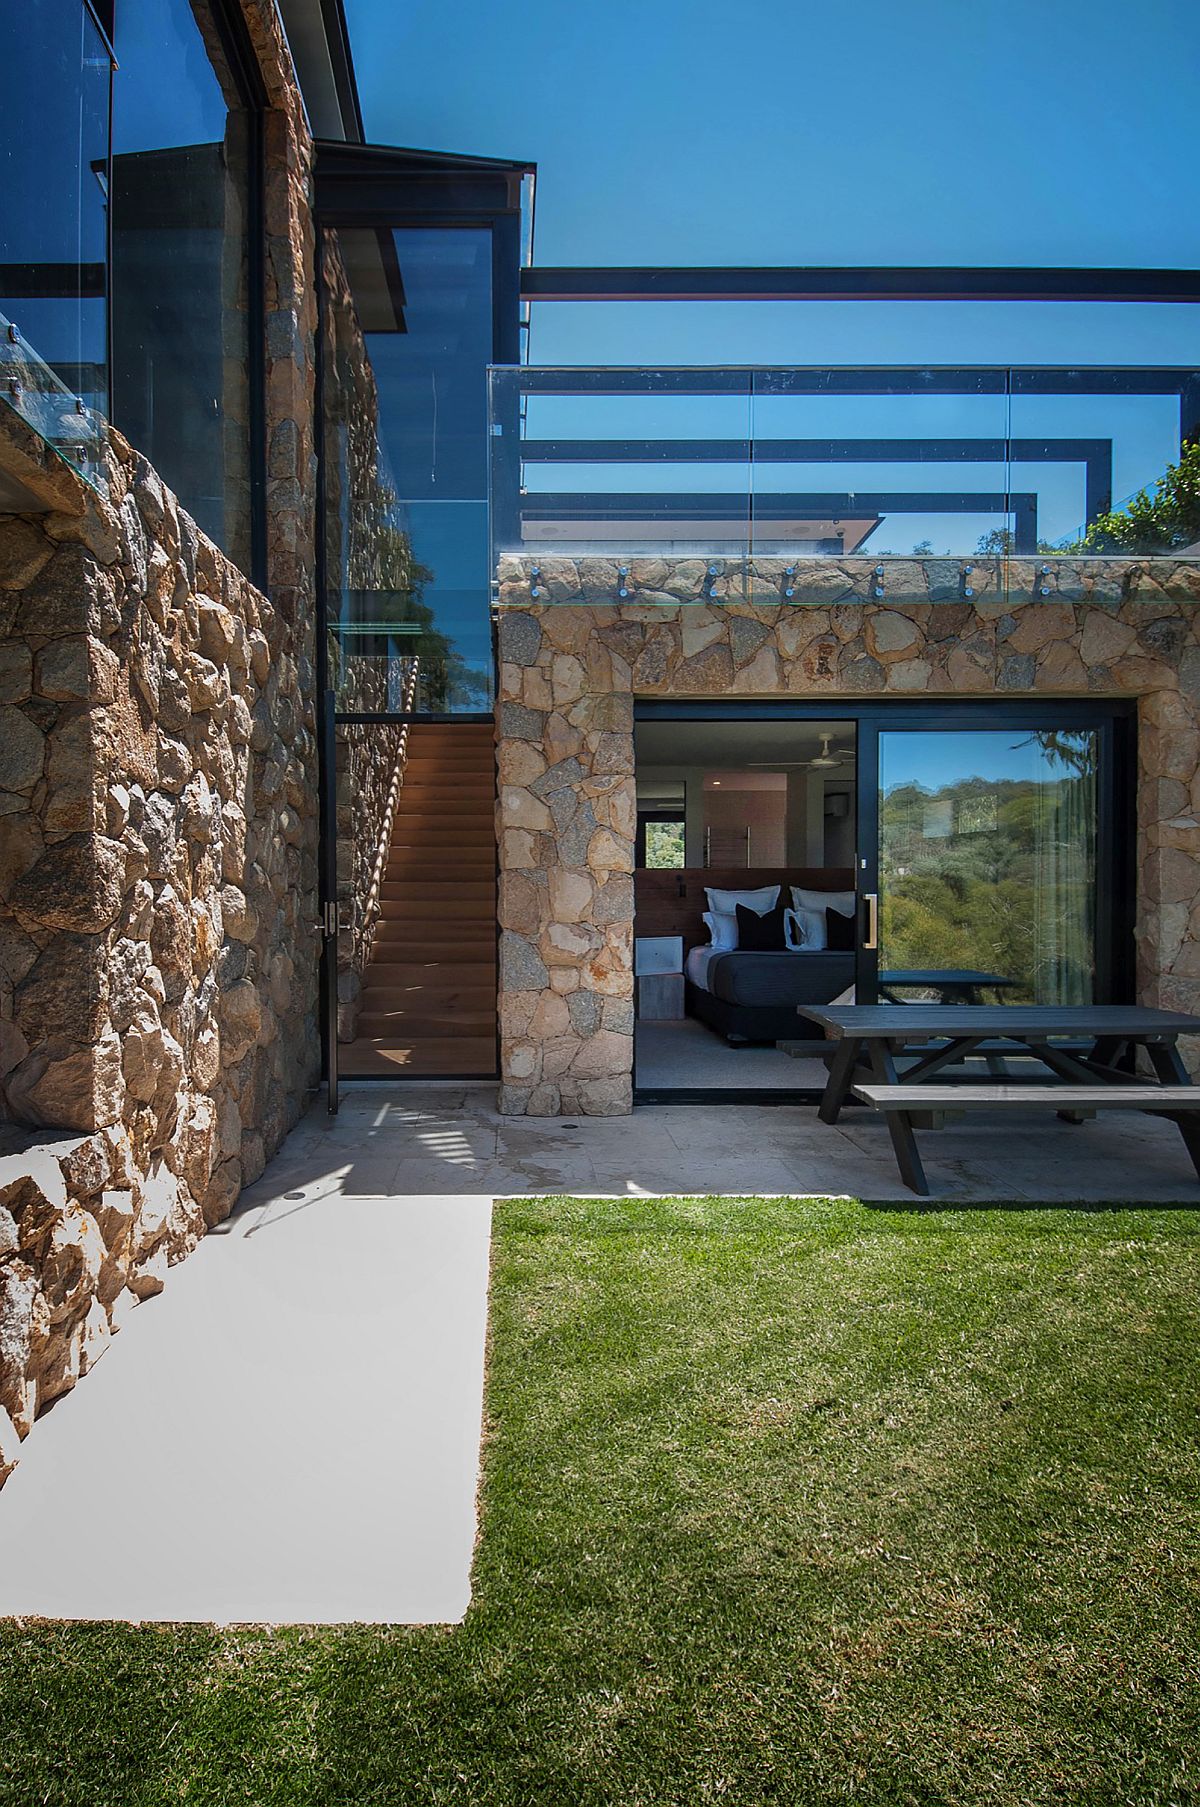 Solid stone walls offer ample protection from the elements i the west and east directions